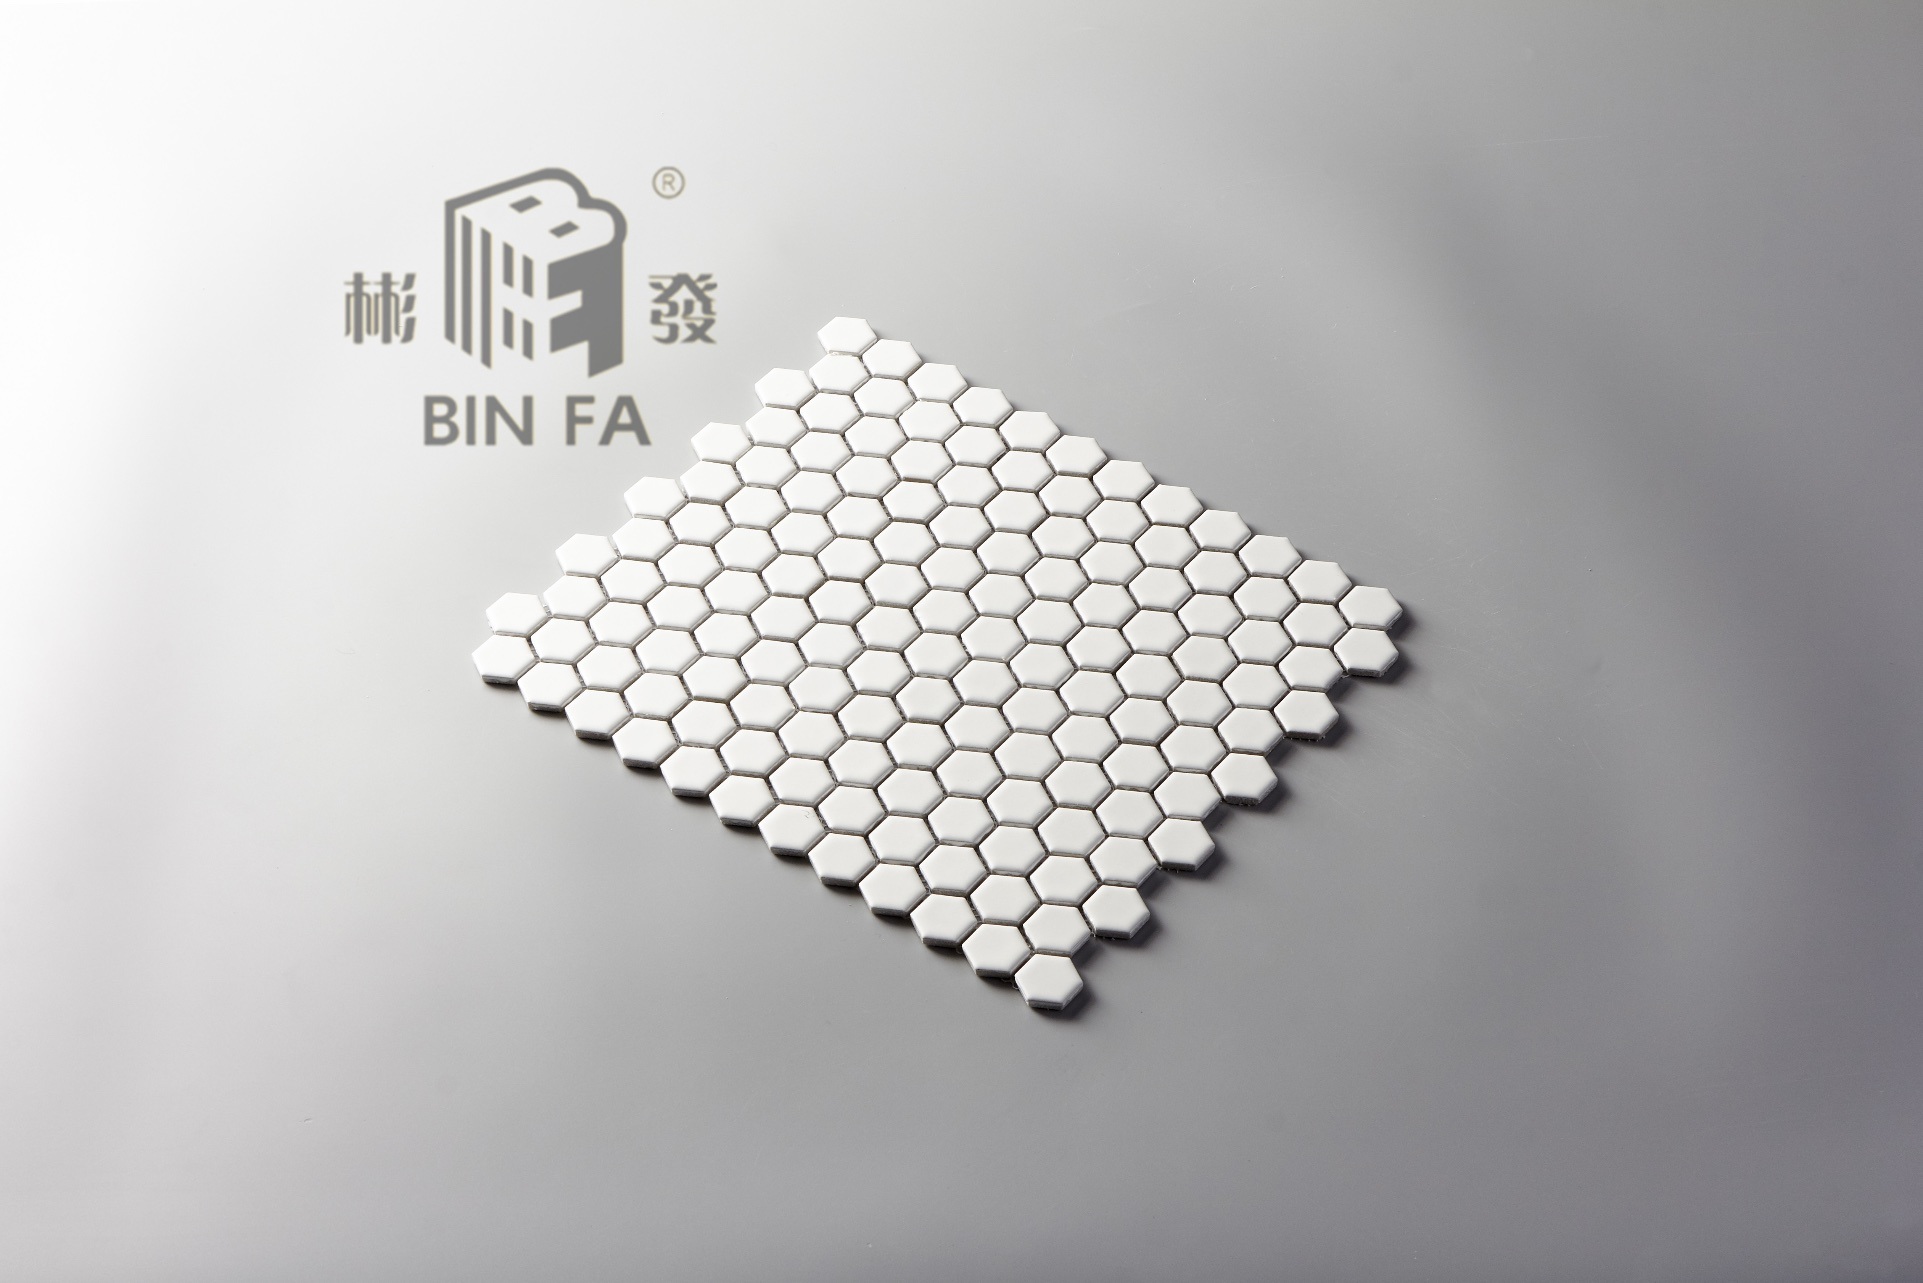 2017 Vintage White 23*23mm Honeycomb Hexagonal Ceramic Mosaic Tile for Decoration, Kitchen, Bathroom and Swimming Pool